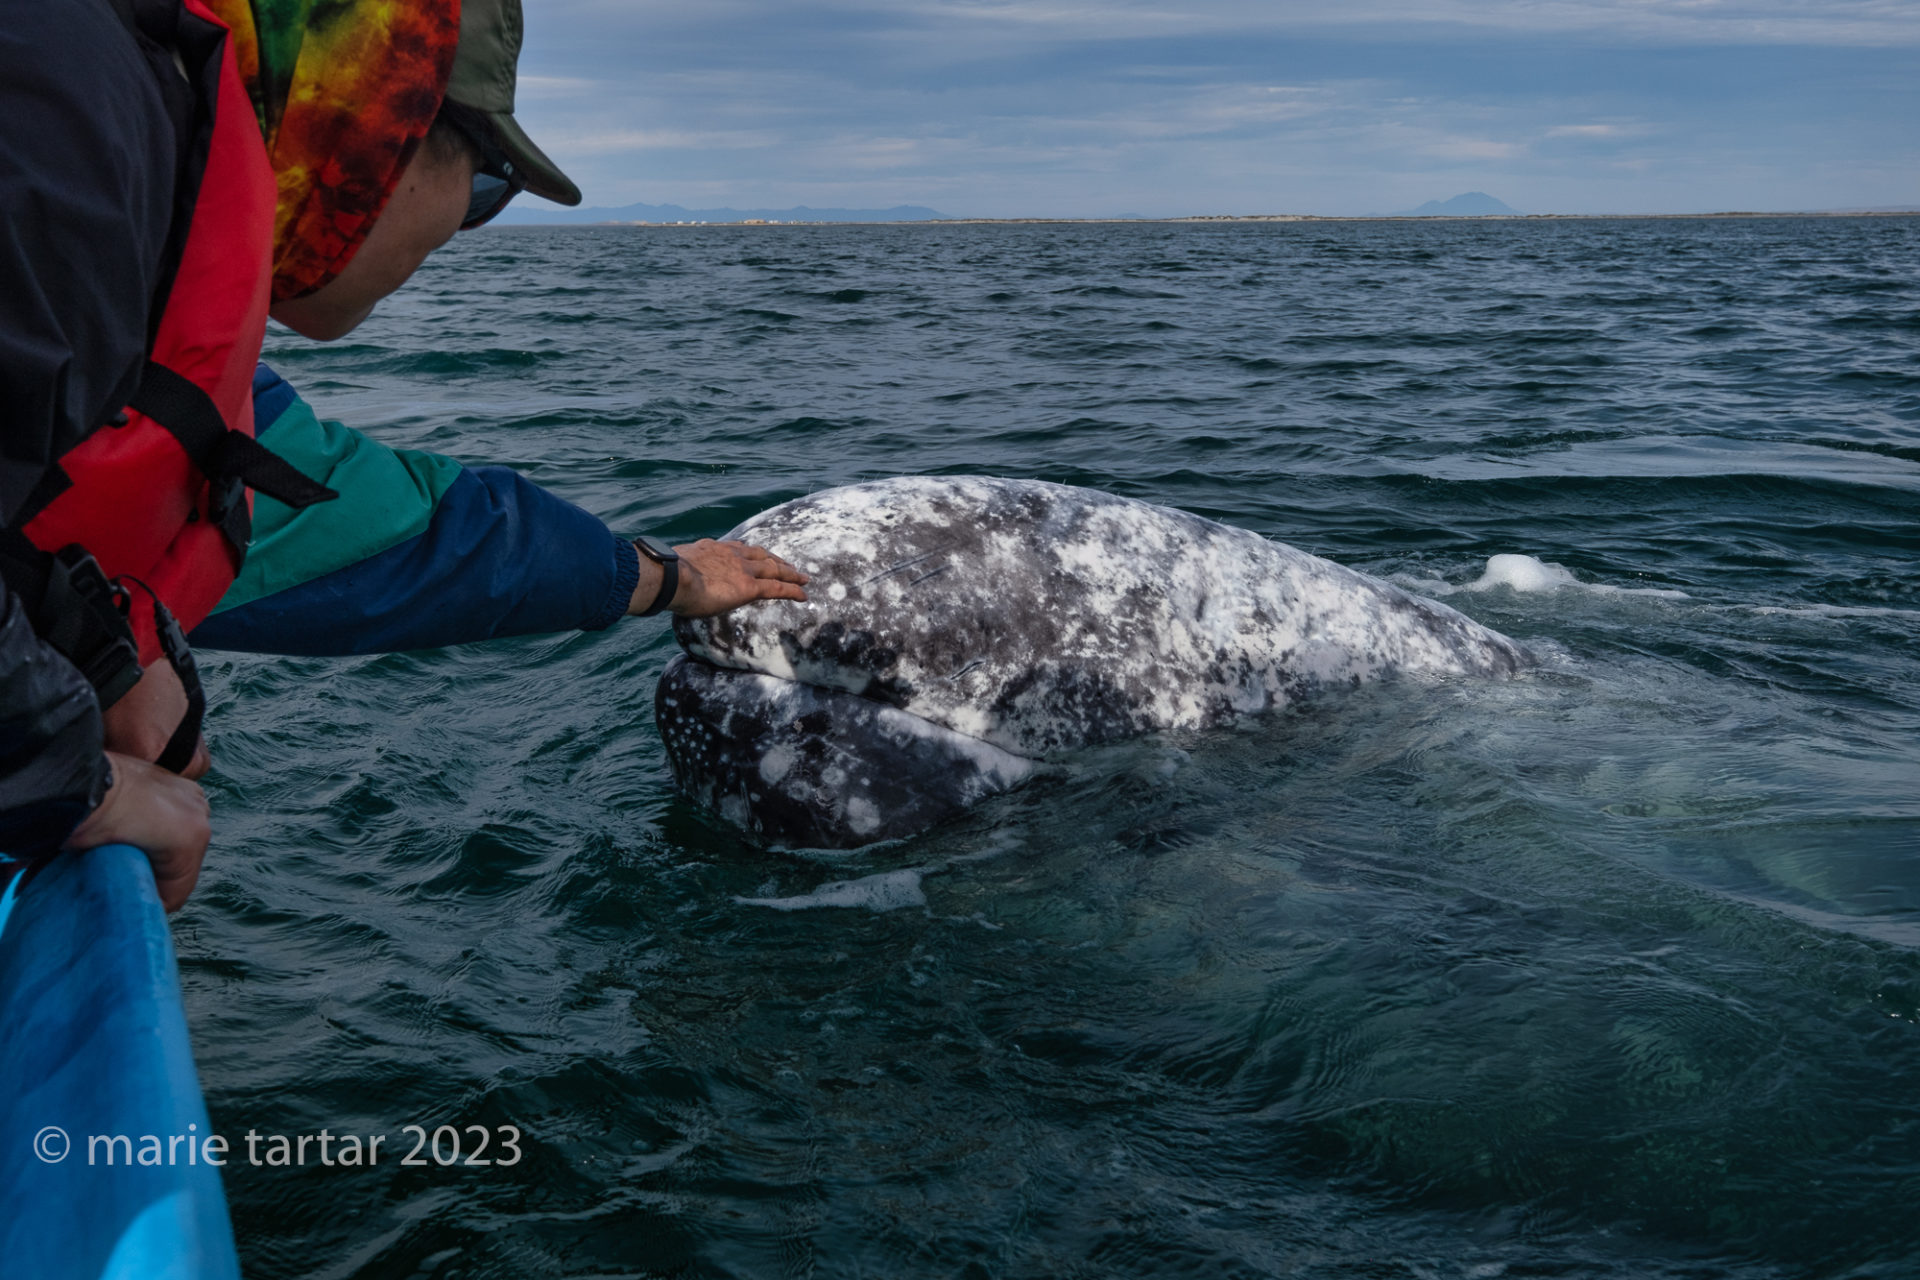 Some gray whales in San Ignacio lagoon seem to seek out human interaction, even touch.